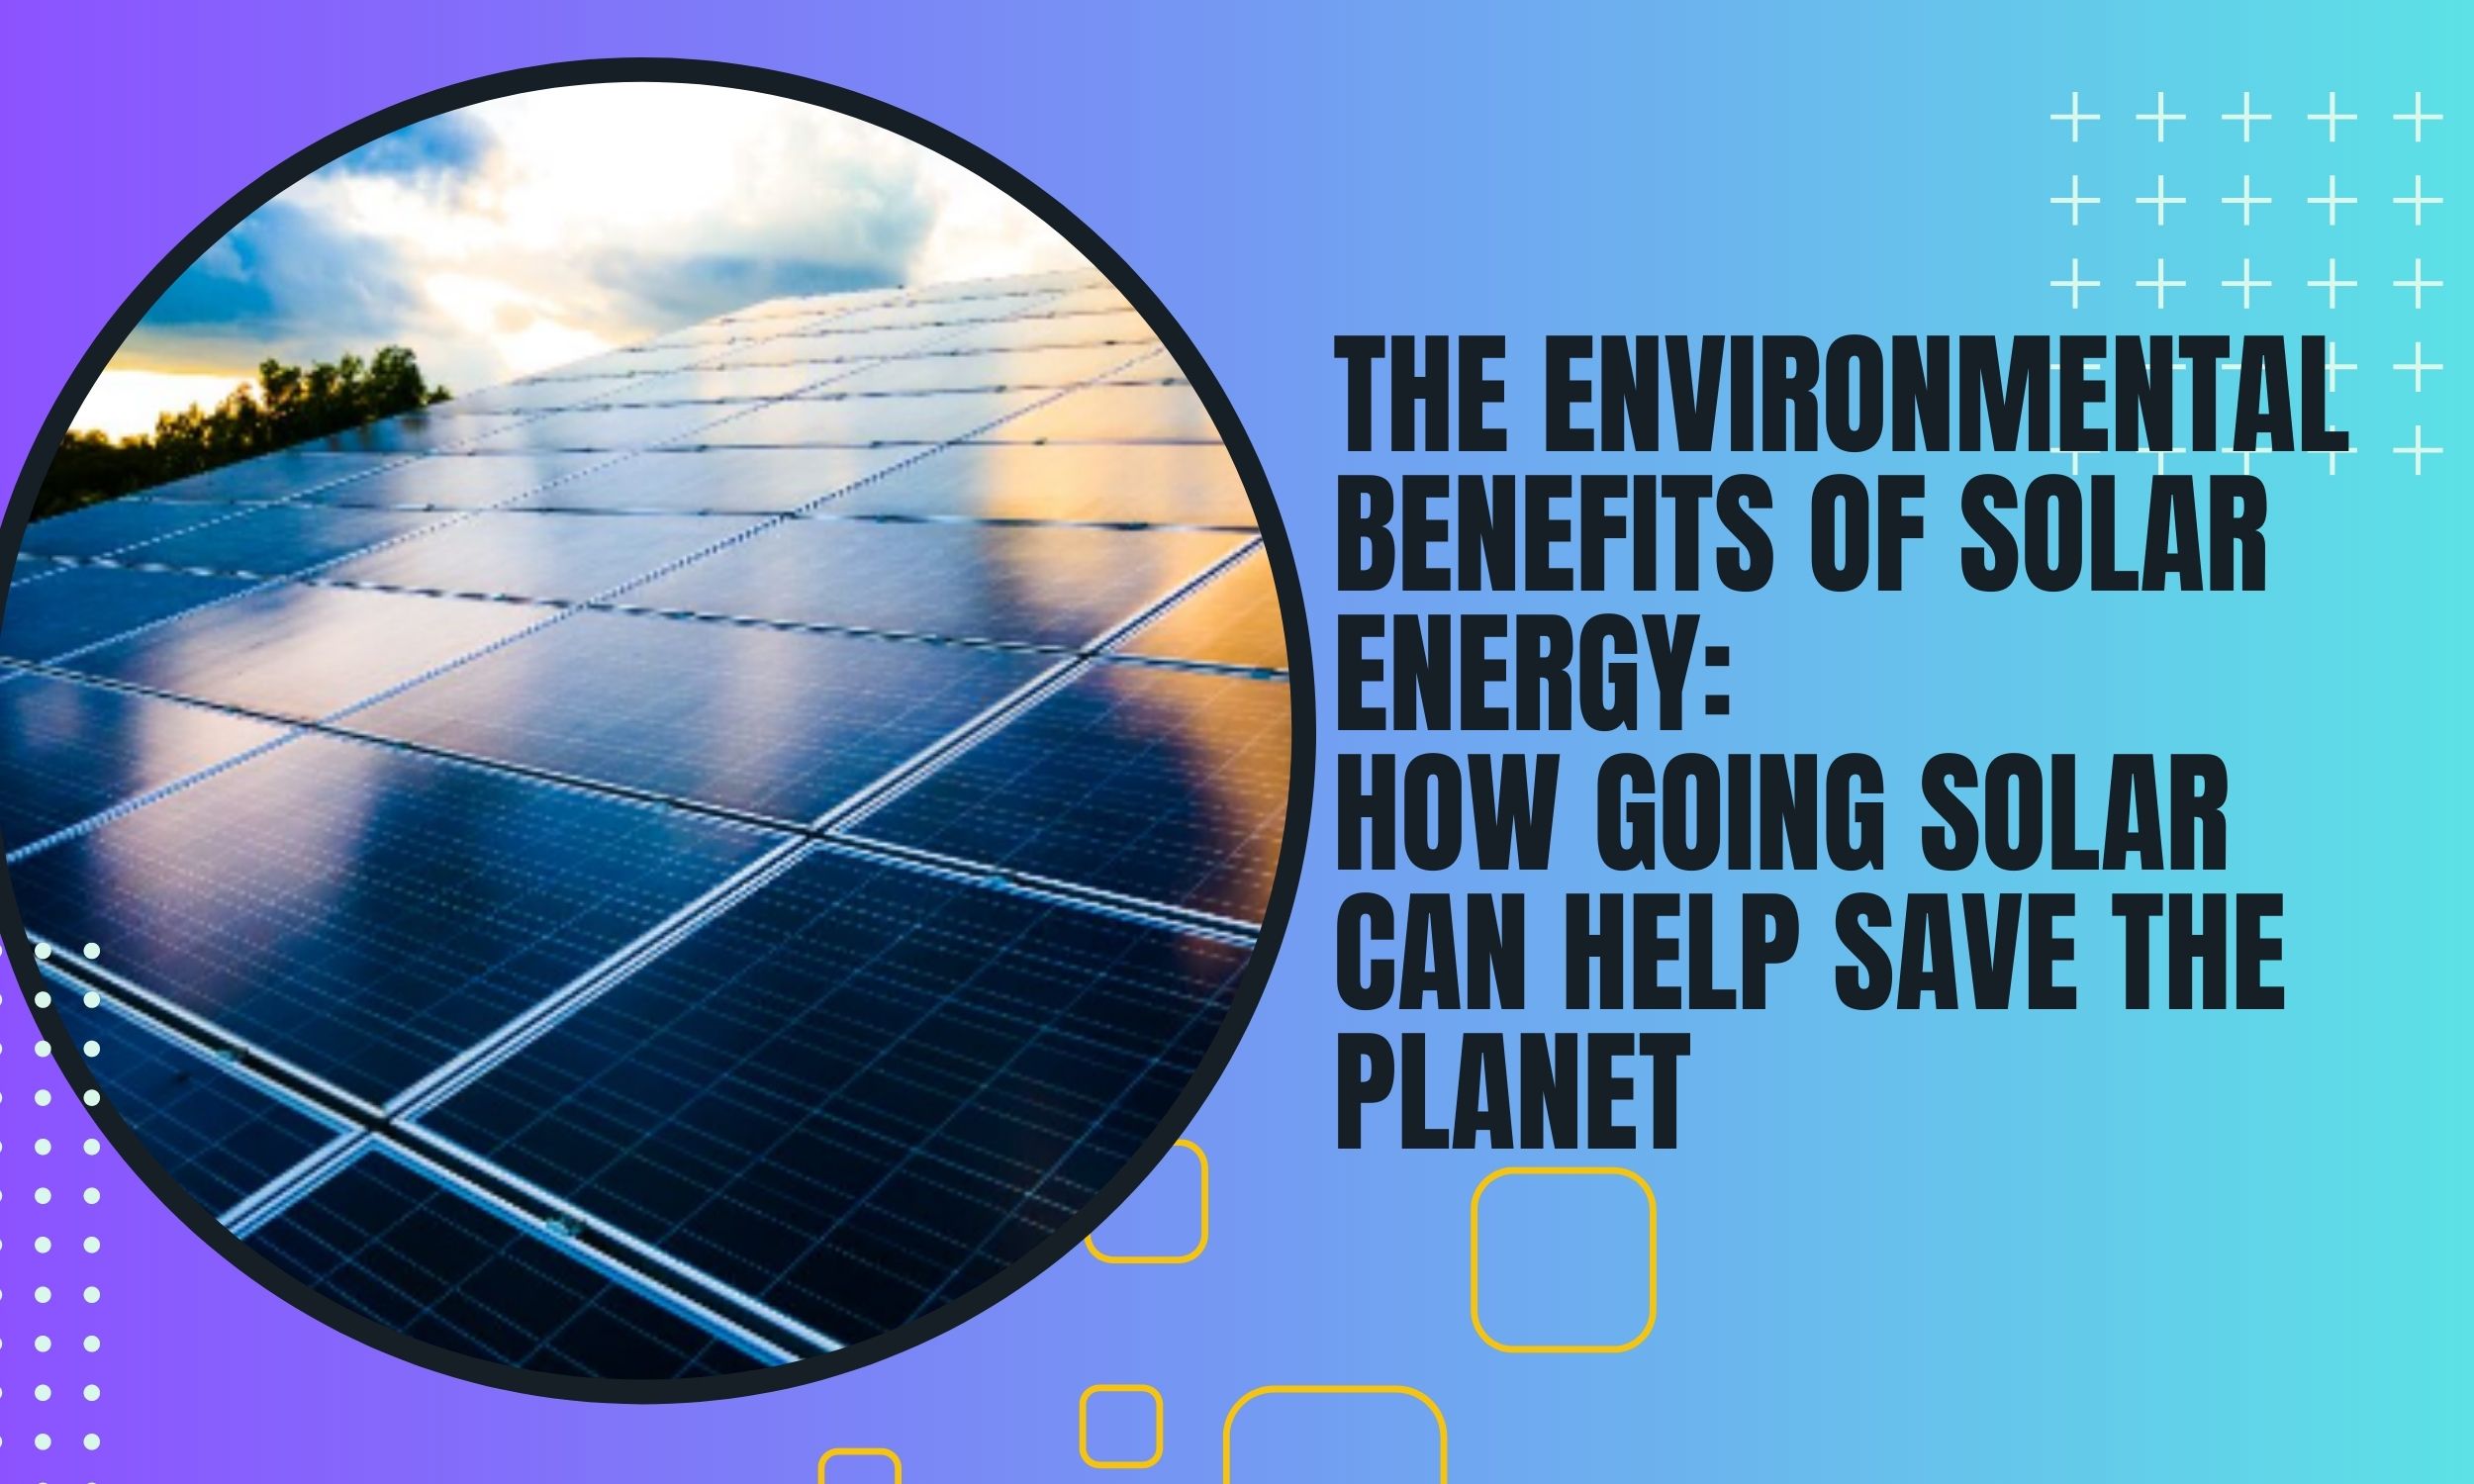 The Environmental Benefits of Solar energy: How Going Solar Can Help Save the Planet